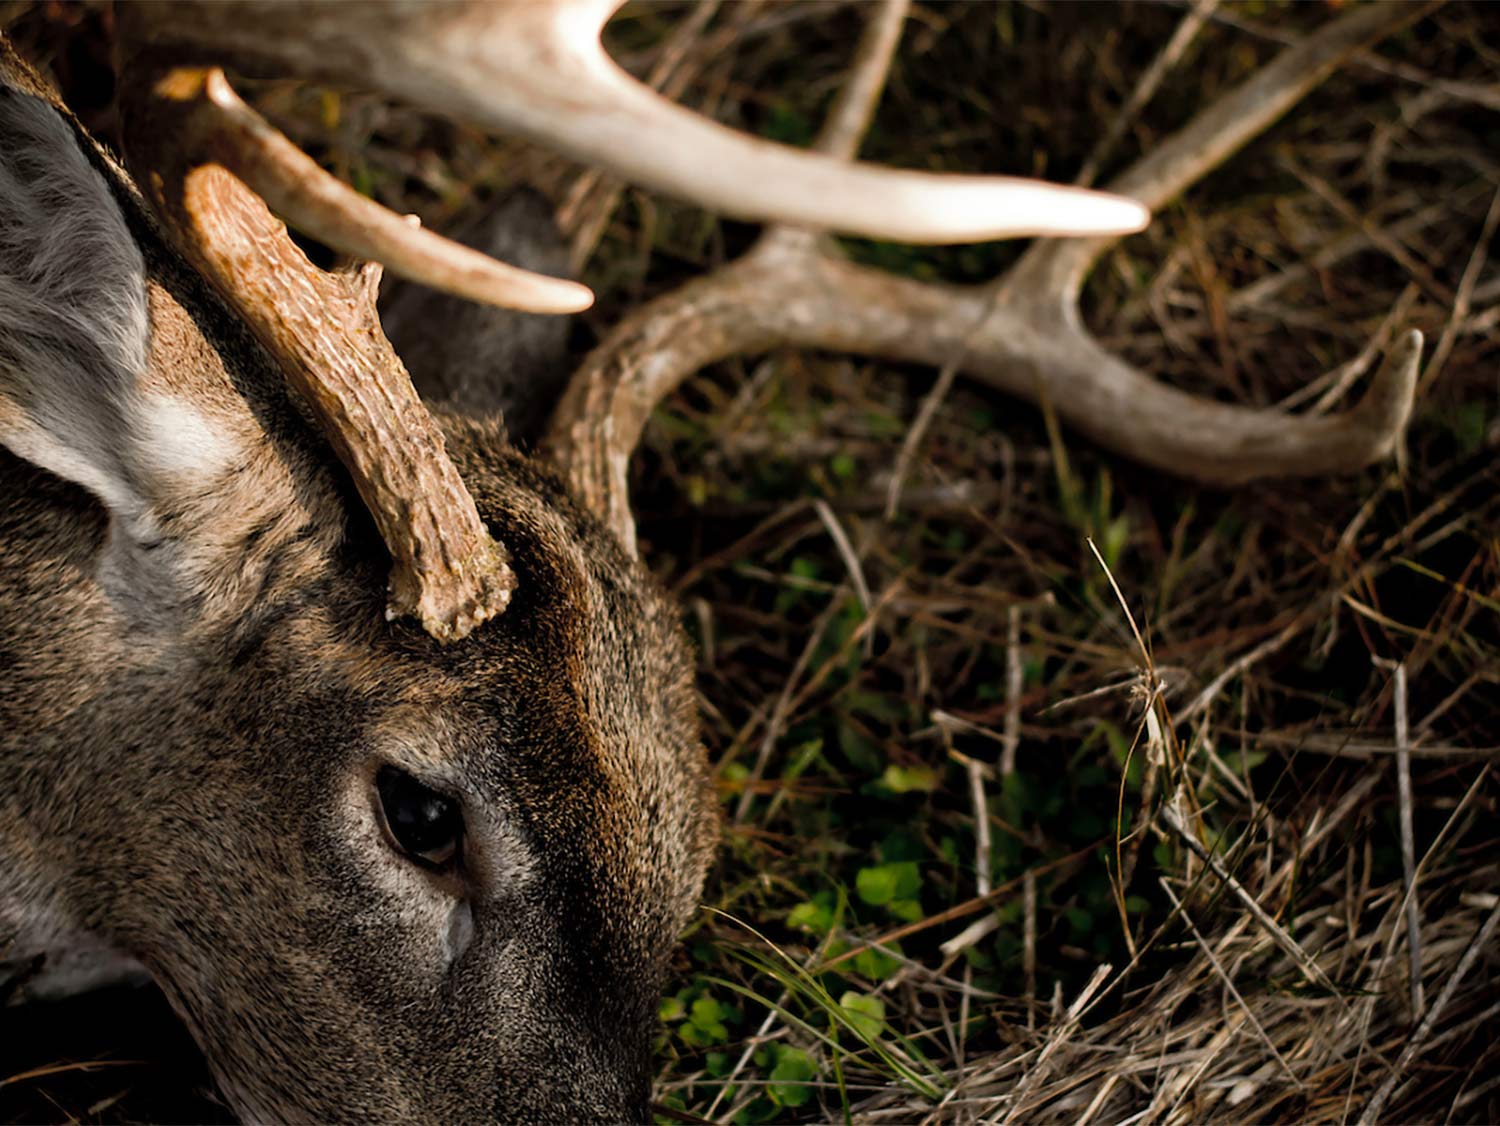 Close up details of a whitetail deer head and antlers with it lying in the dirt.